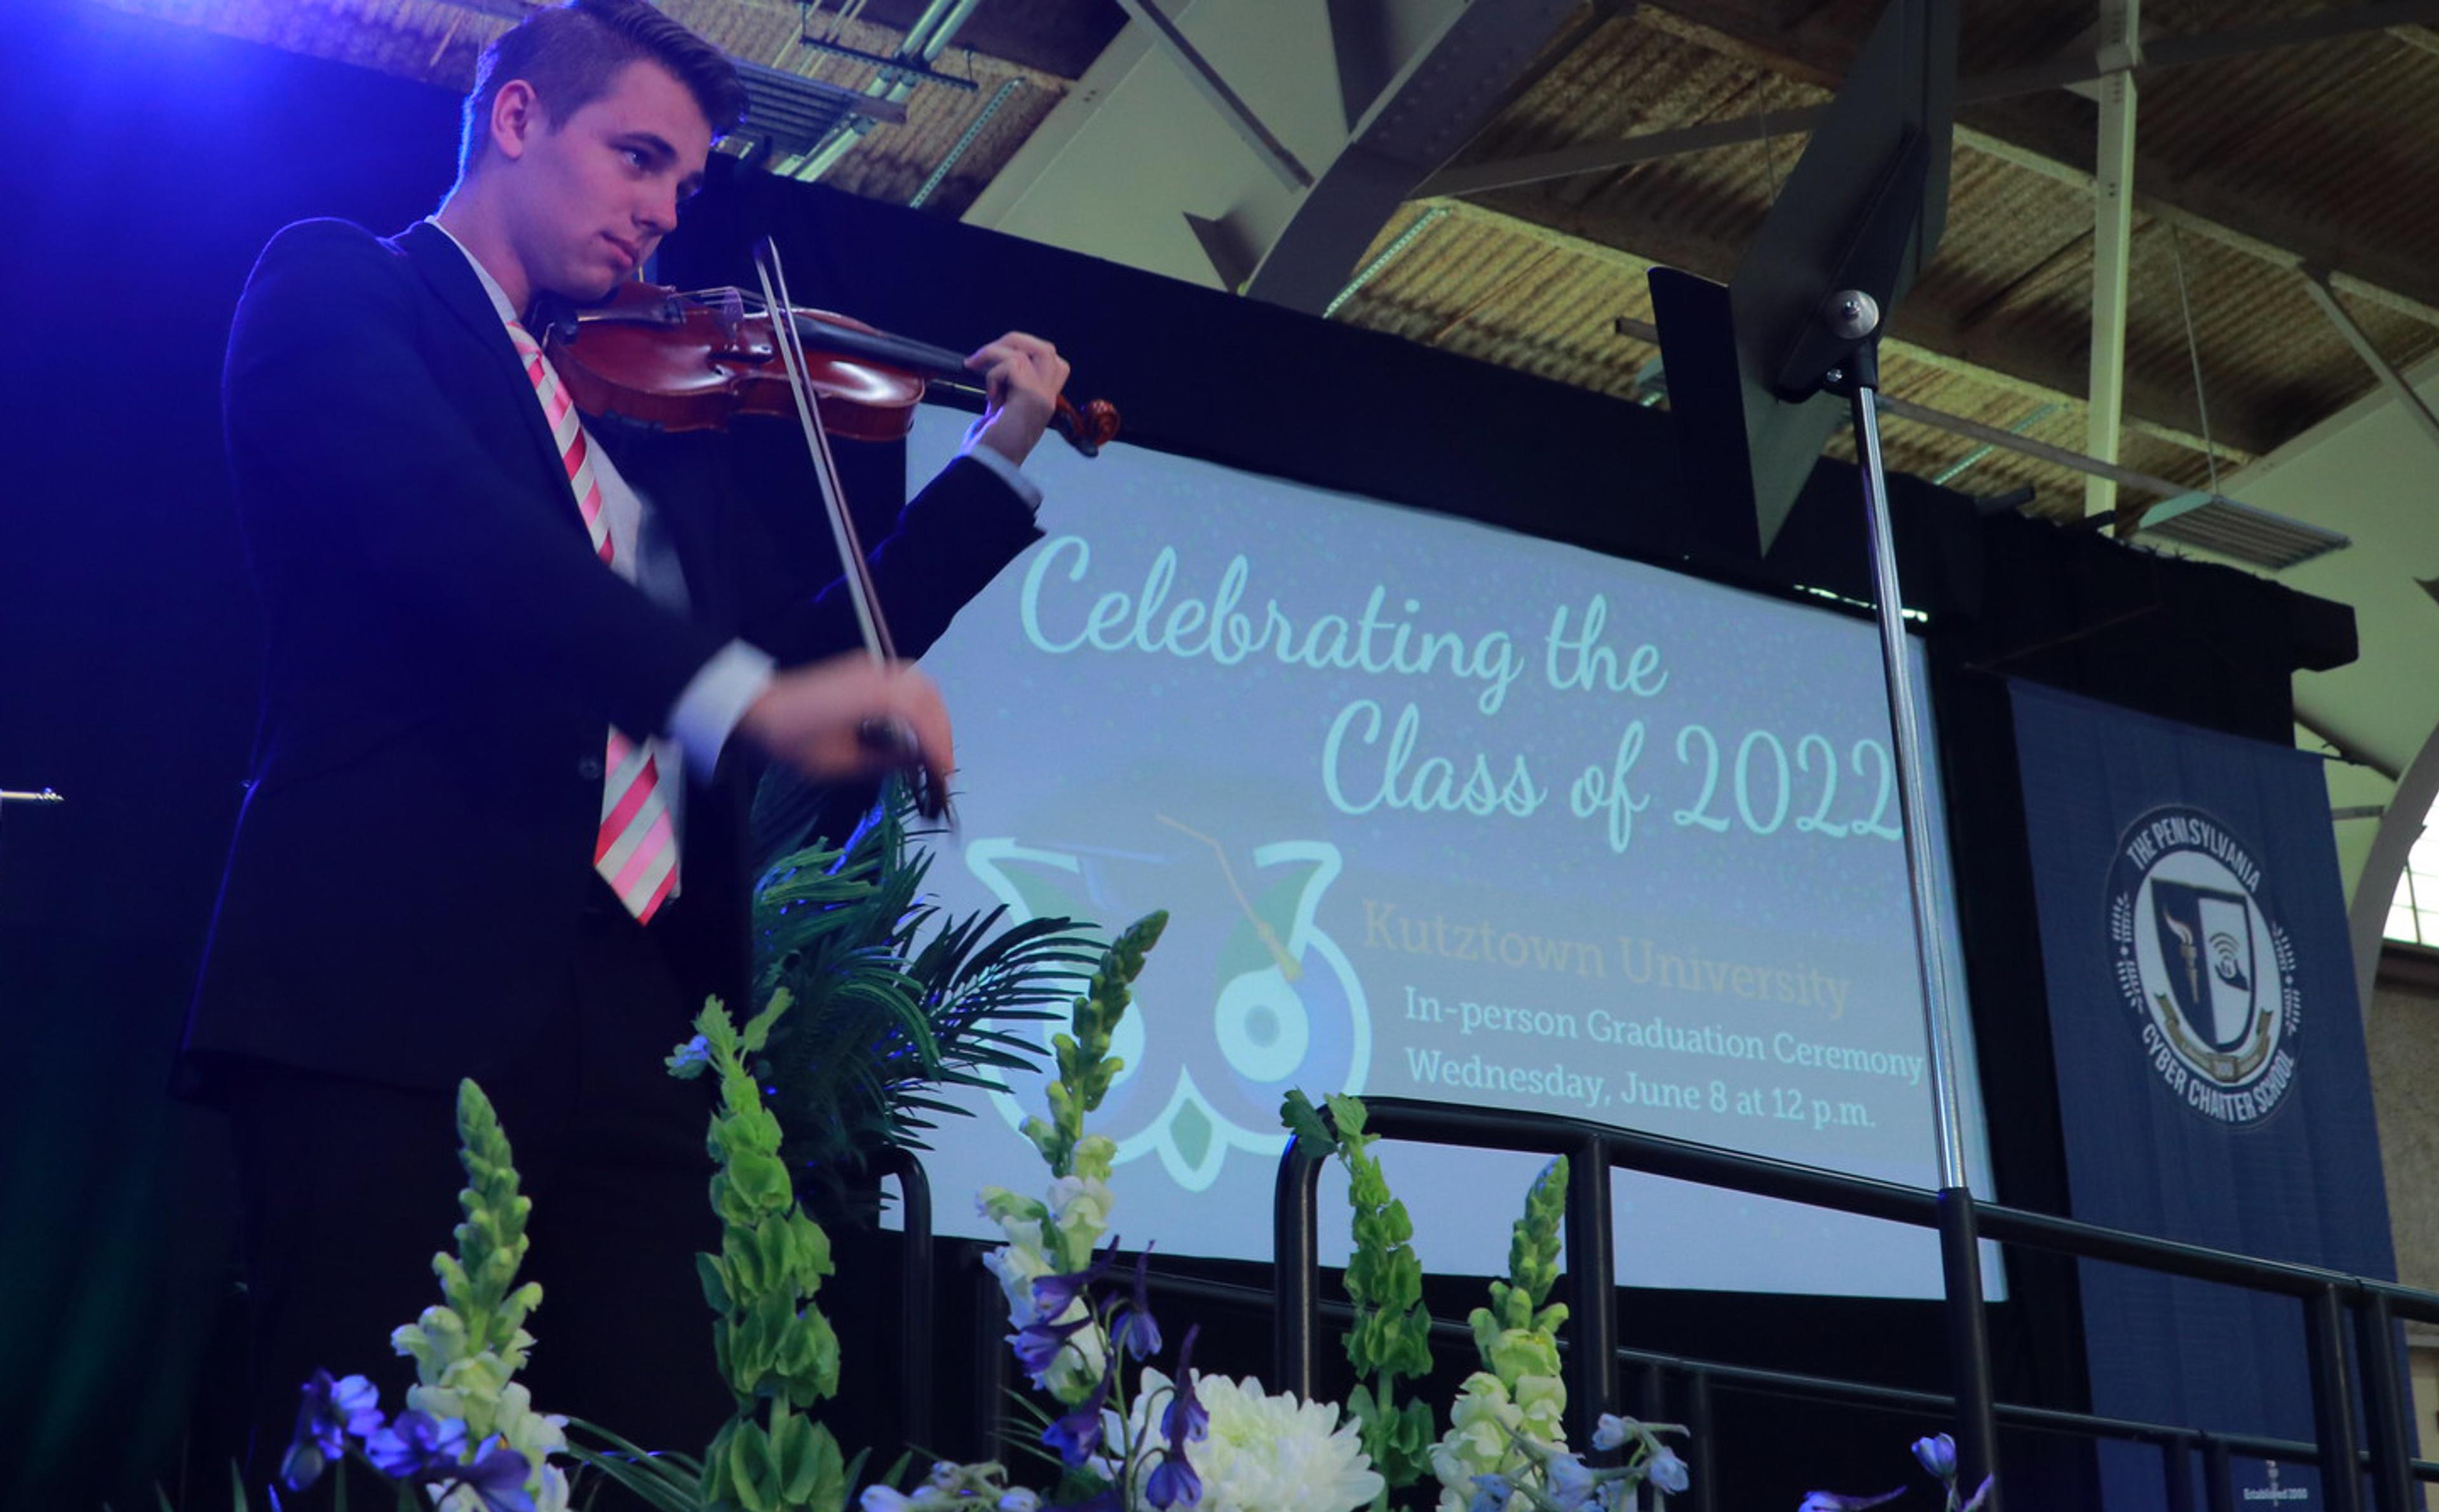 Student plays violin on stage at graduation ceremony.